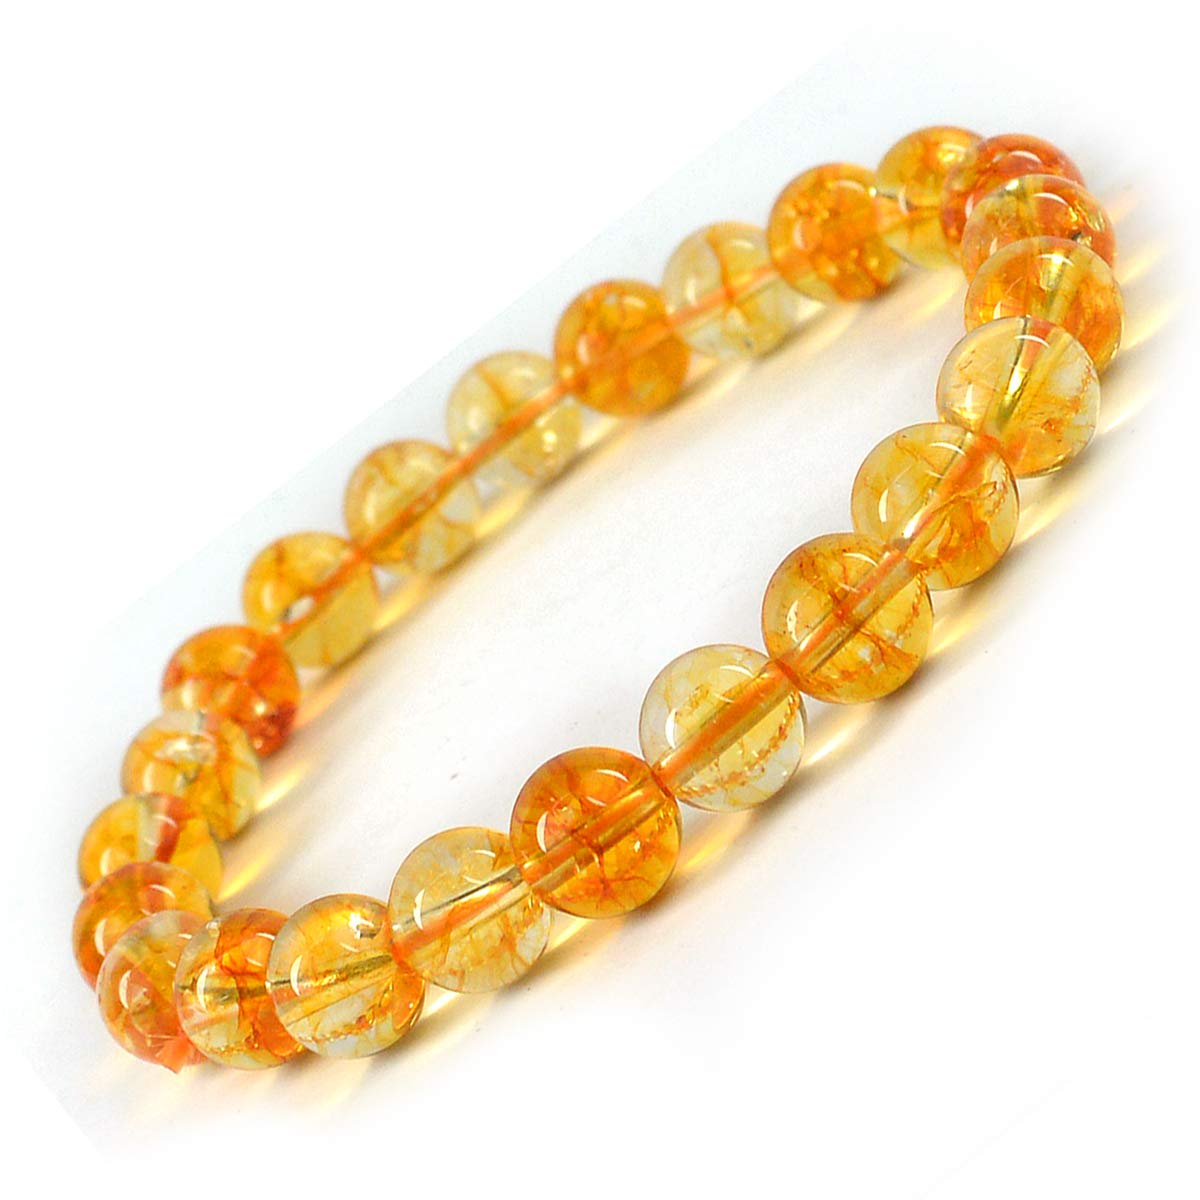 Healing Crystals India - US Store | Wholesale Citirne Bracelet